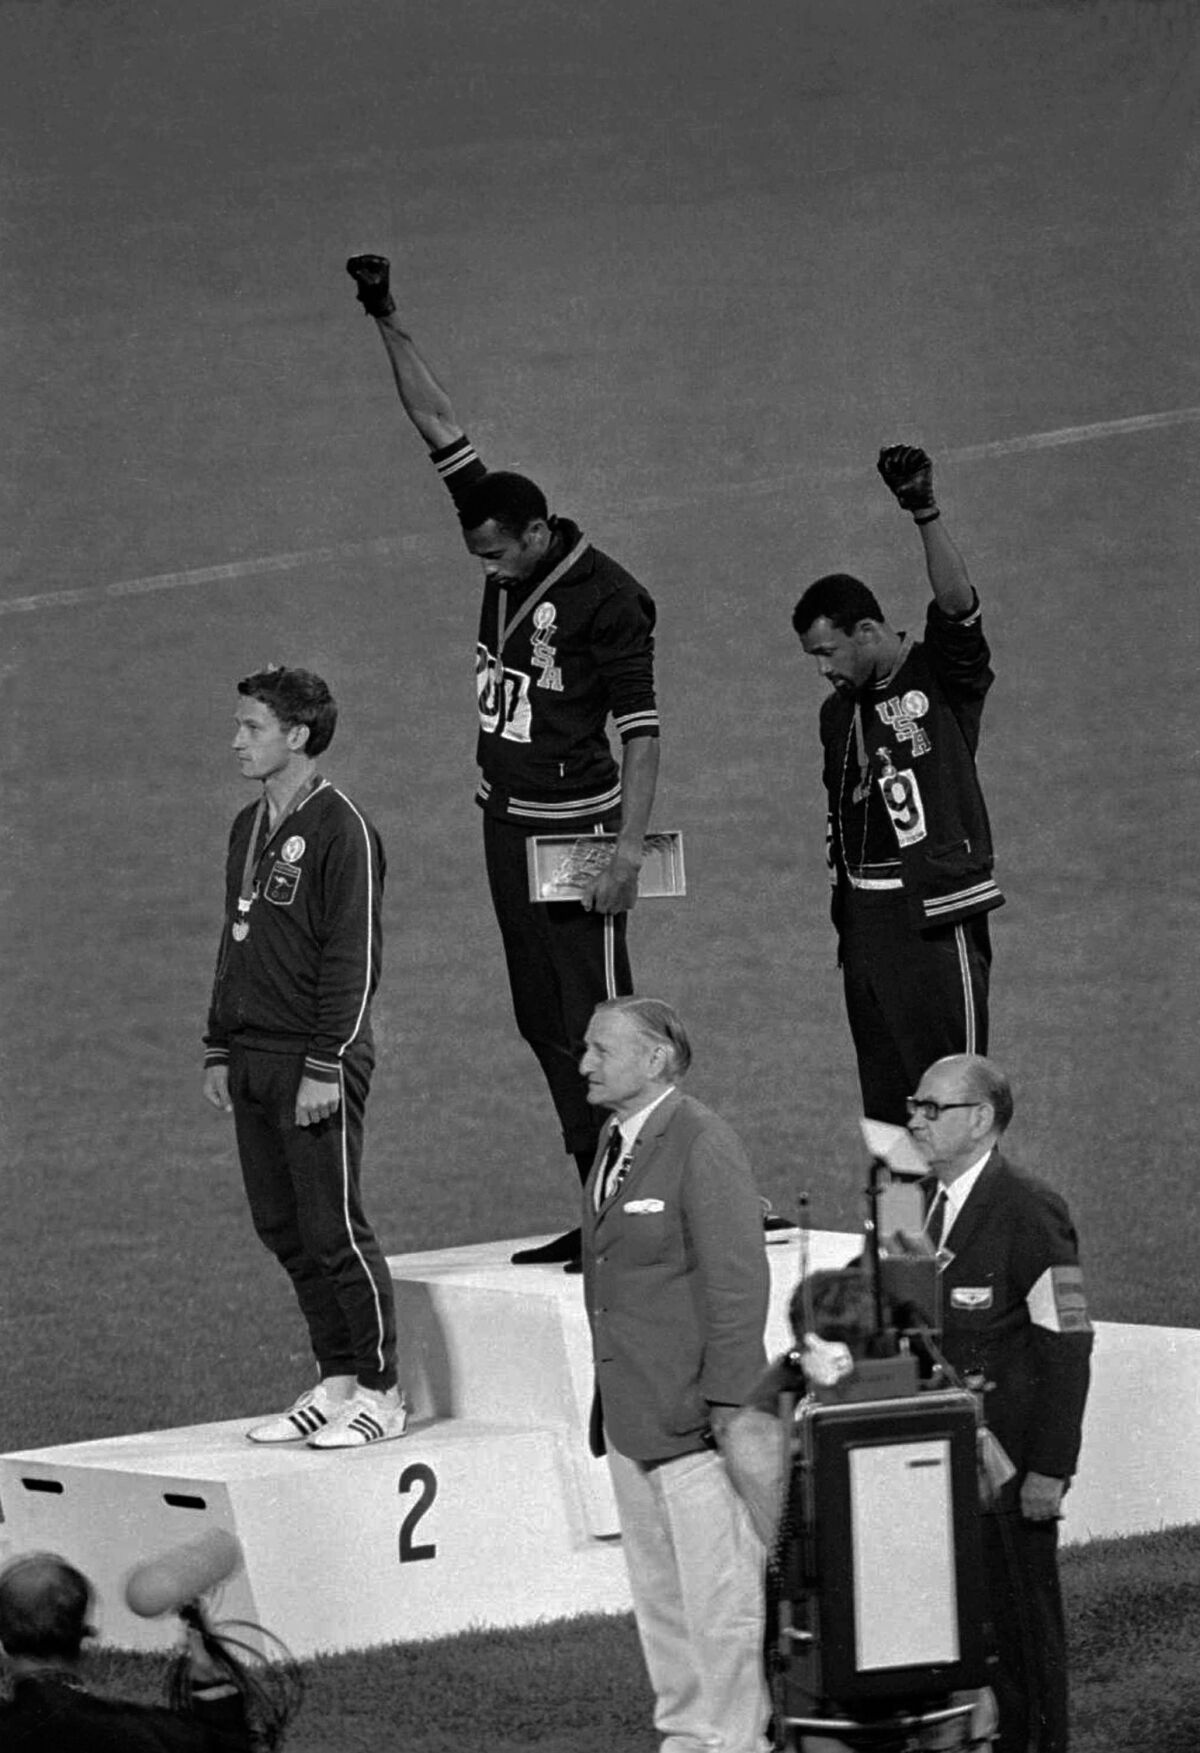 U.S. athletes Tommie Smith and John Carlos raise their gloved fists